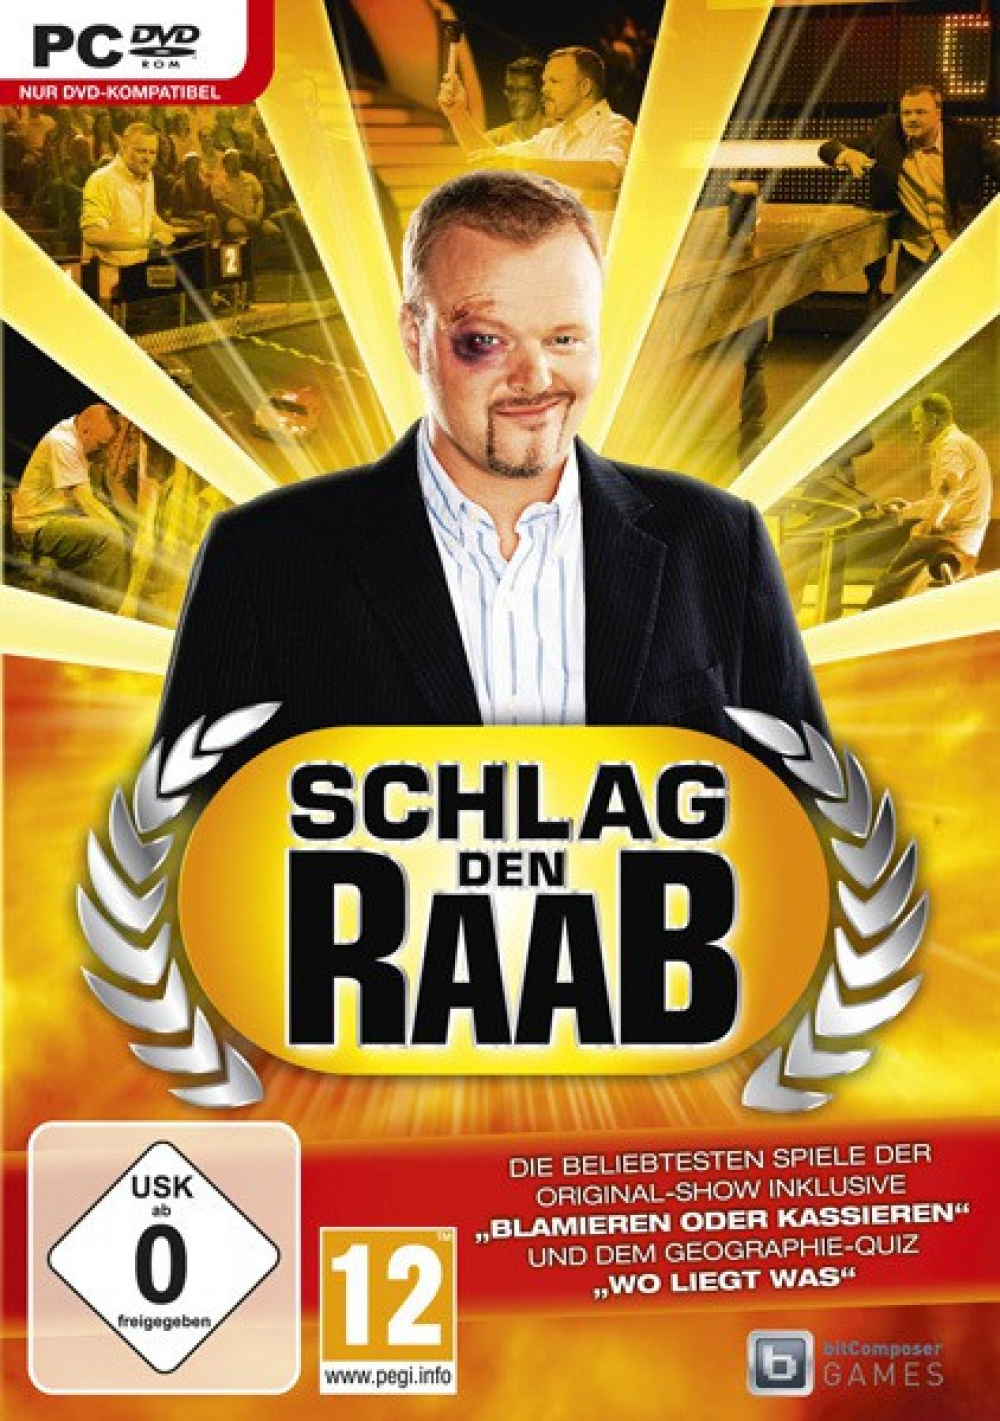 Schlag den Raab – Das 3. Spiel | Video Game Reviews and Previews PC, PS4,  Xbox One and mobile